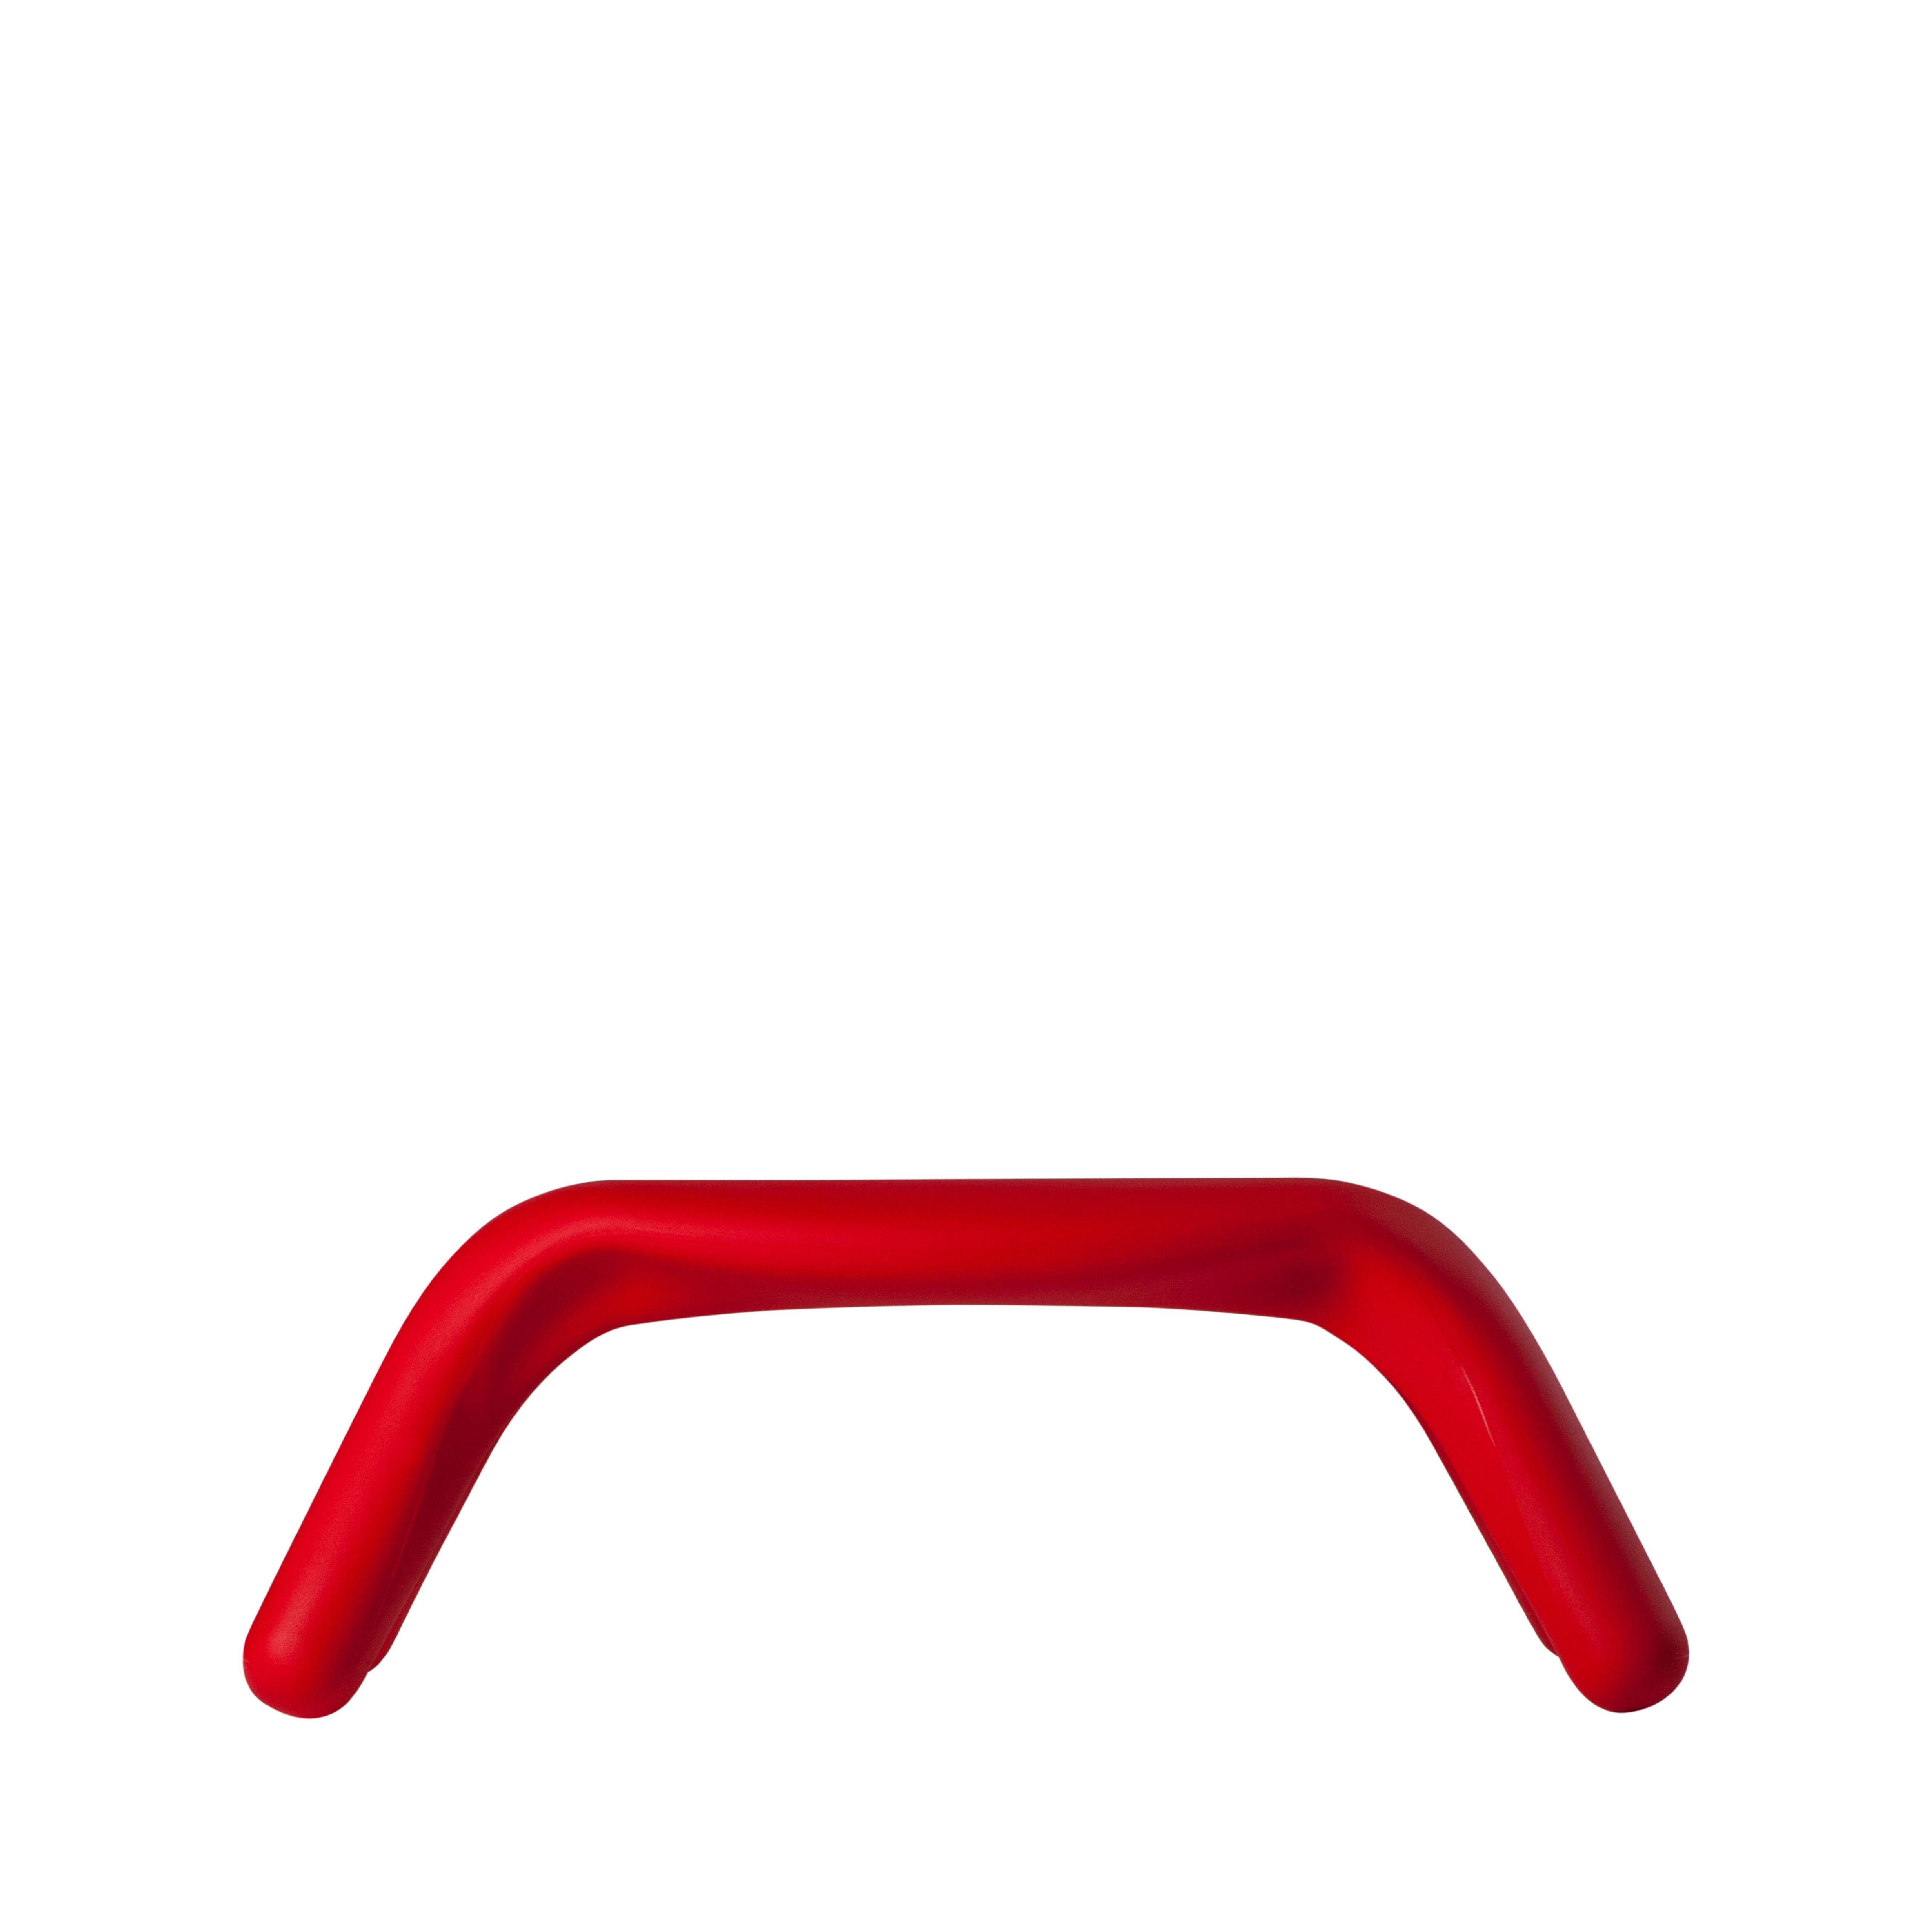 Flame Red Atlas Bench by Giorgio Biscaro
Dimensions: D 46 x W 115 x H 42 cm.
Materials: Polyethylene.
Weight: 8 kg.

Available in different color options. This product is suitable for indoor and outdoor use. This product is stackable. Please contact